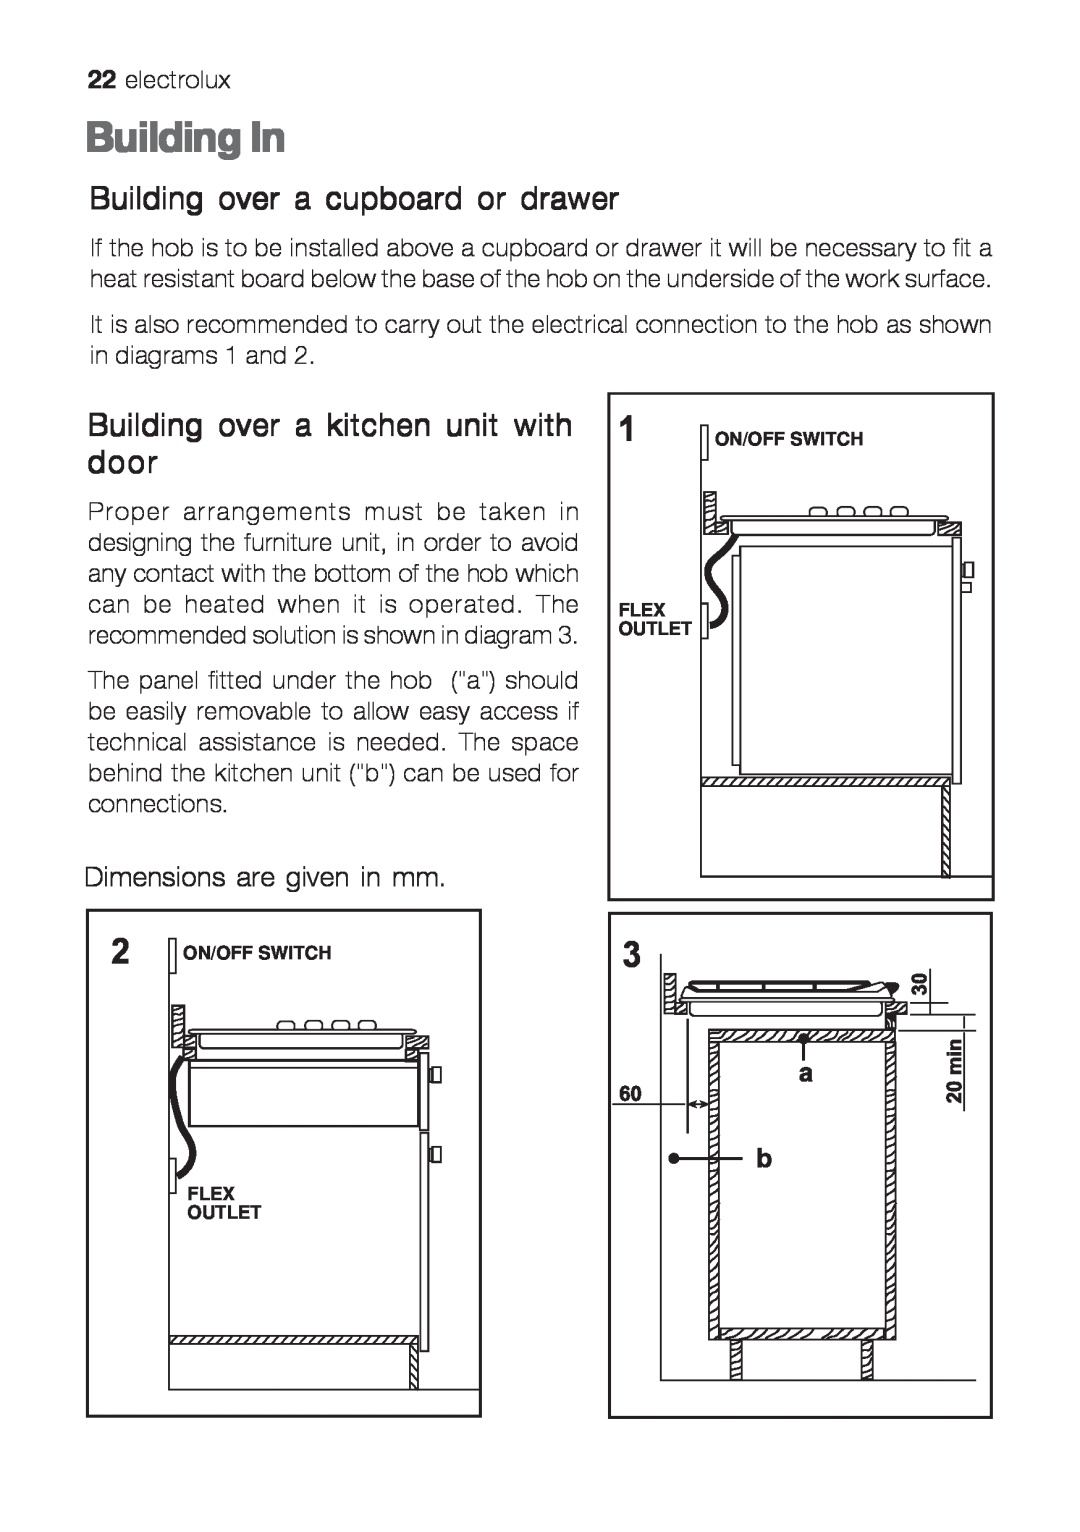 Electrolux EHG 6832, EHG 6402 manual Building In, Building over a cupboard or drawer, Building over a kitchen unit with door 